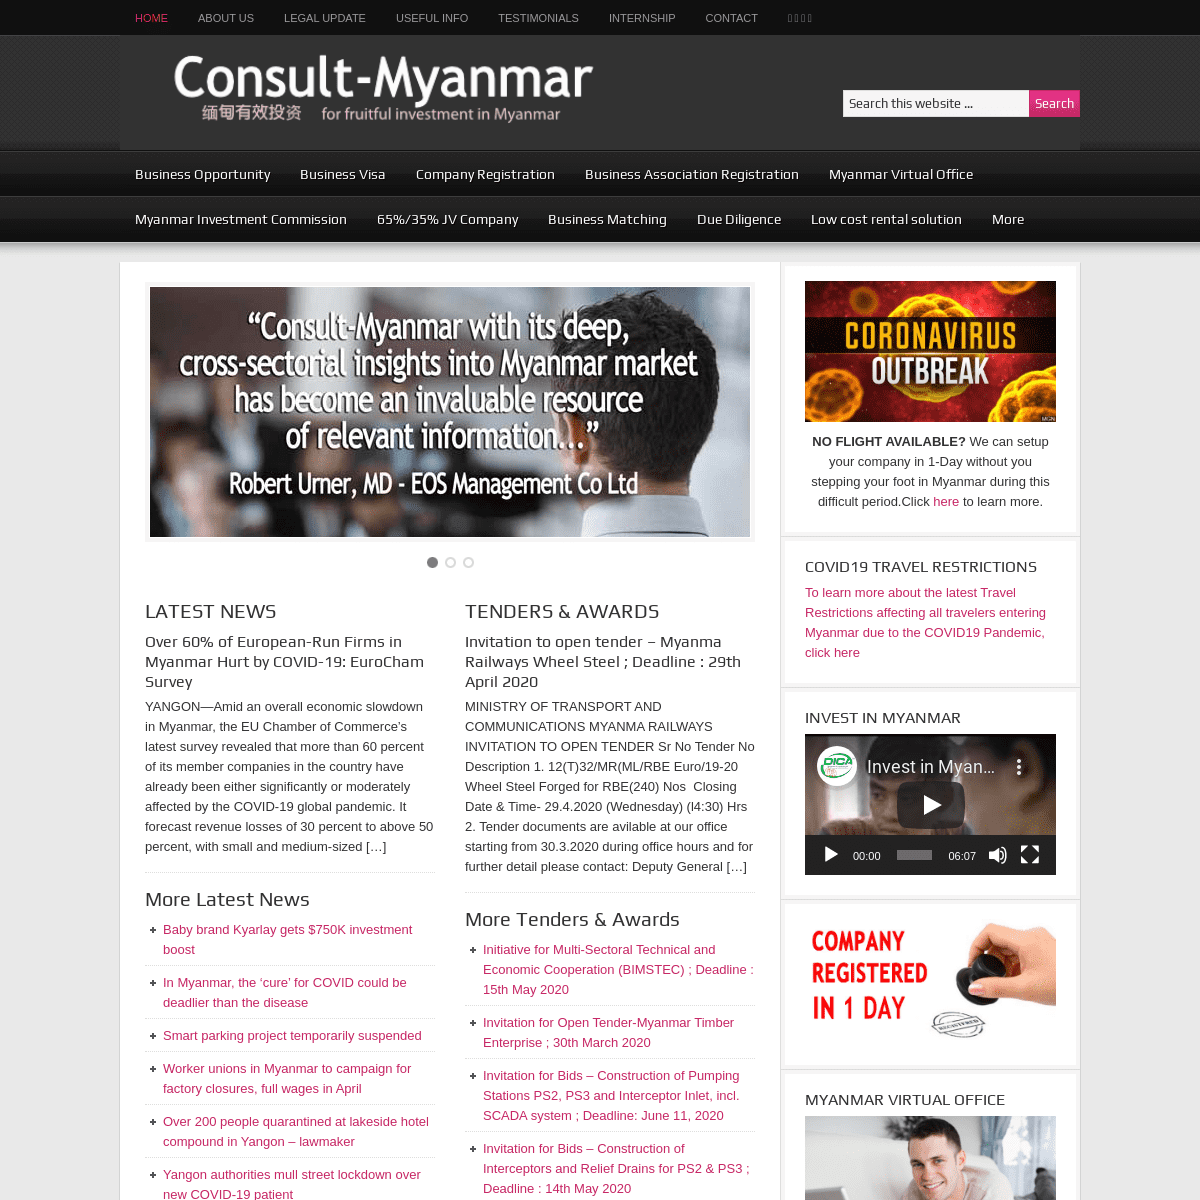 A complete backup of consult-myanmar.com